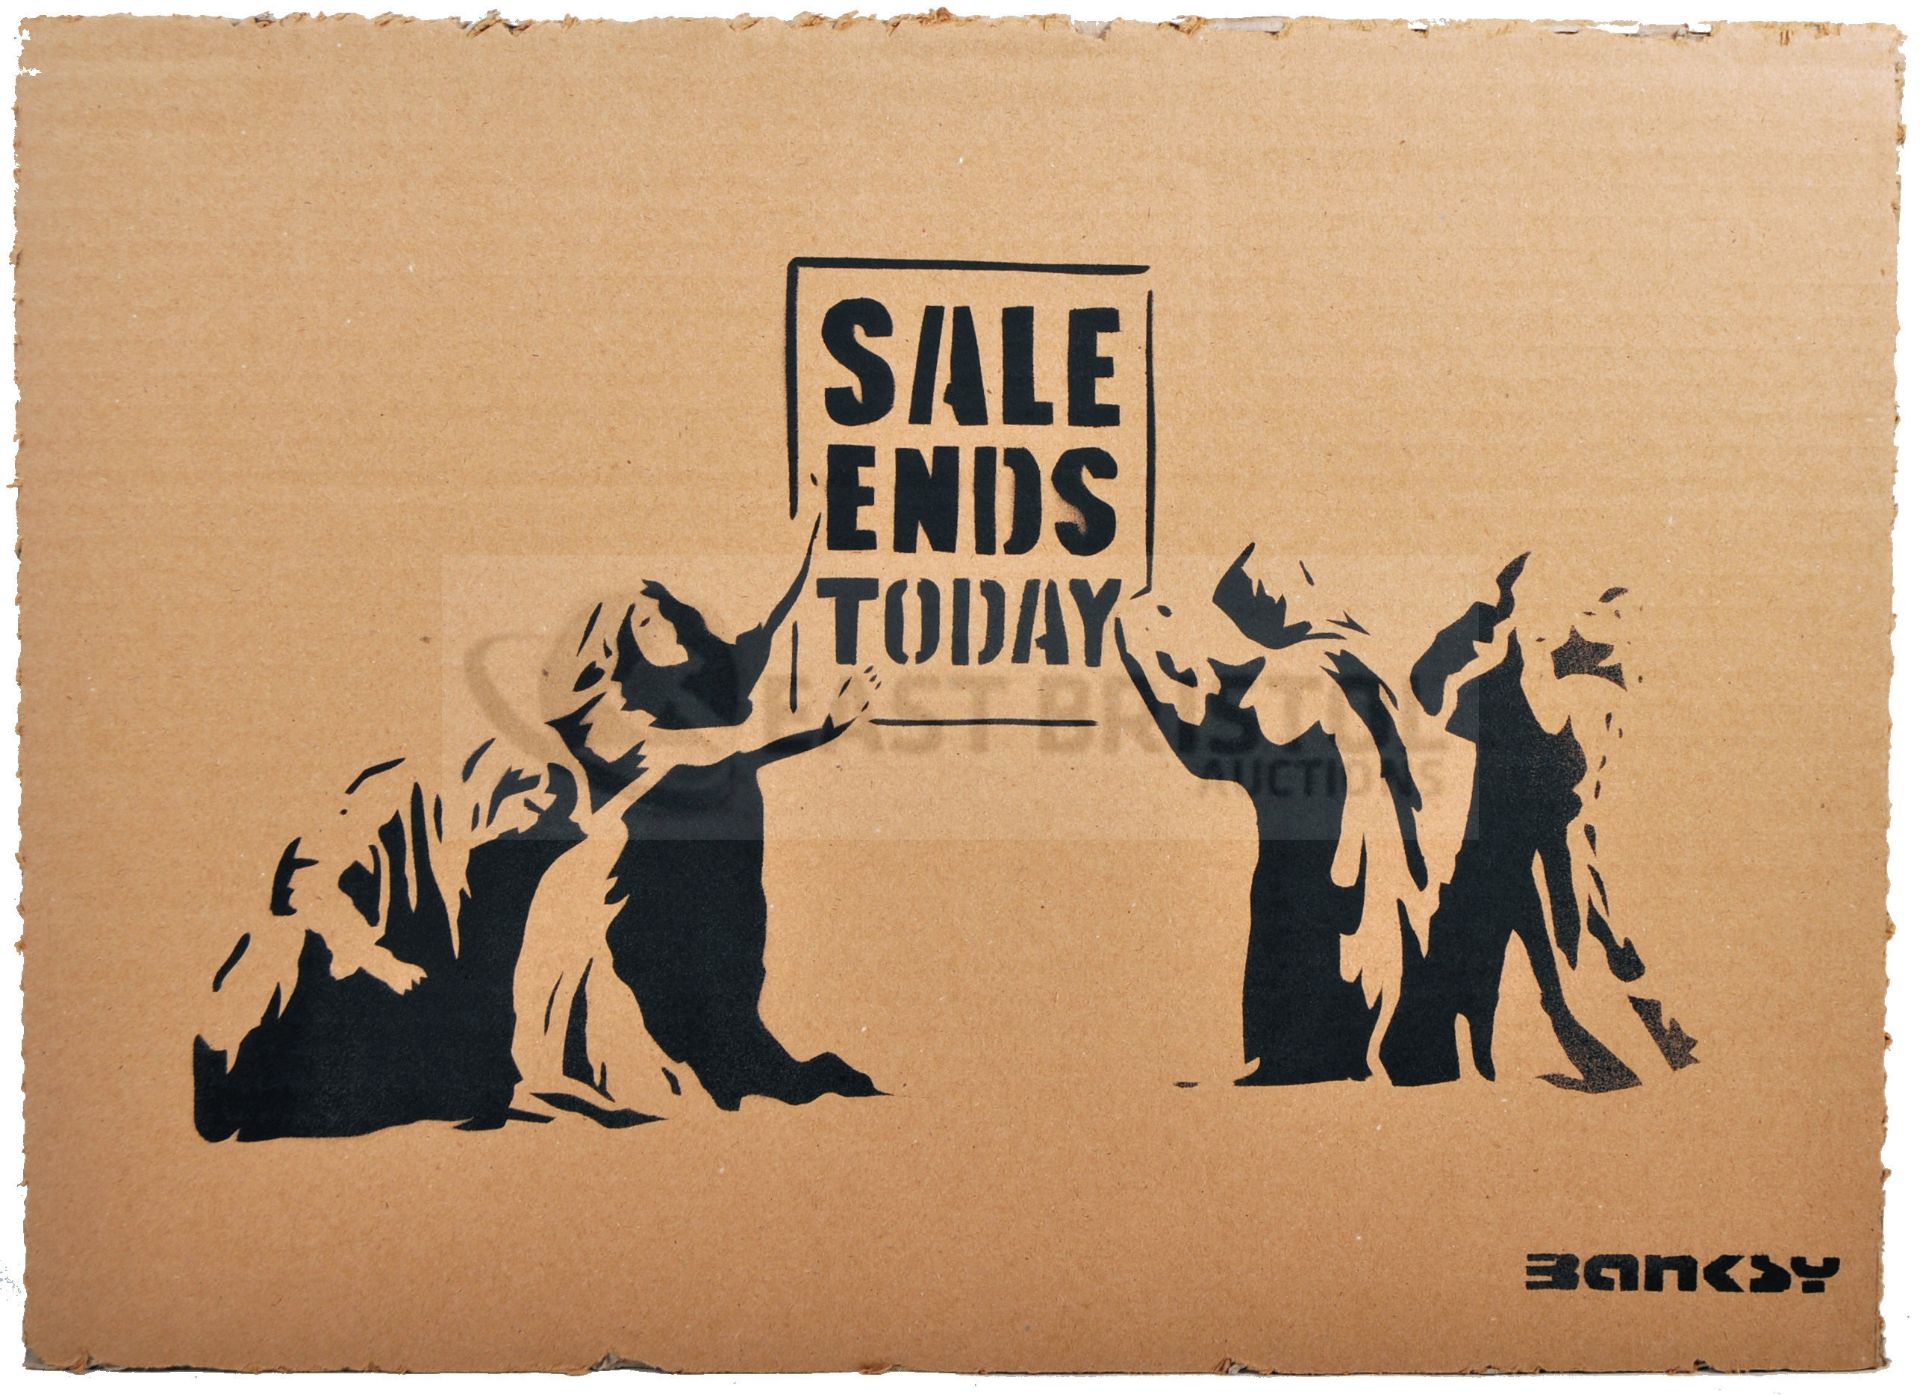 BANKSY - DISMALAND 2015 - SALE ENDS TODAY